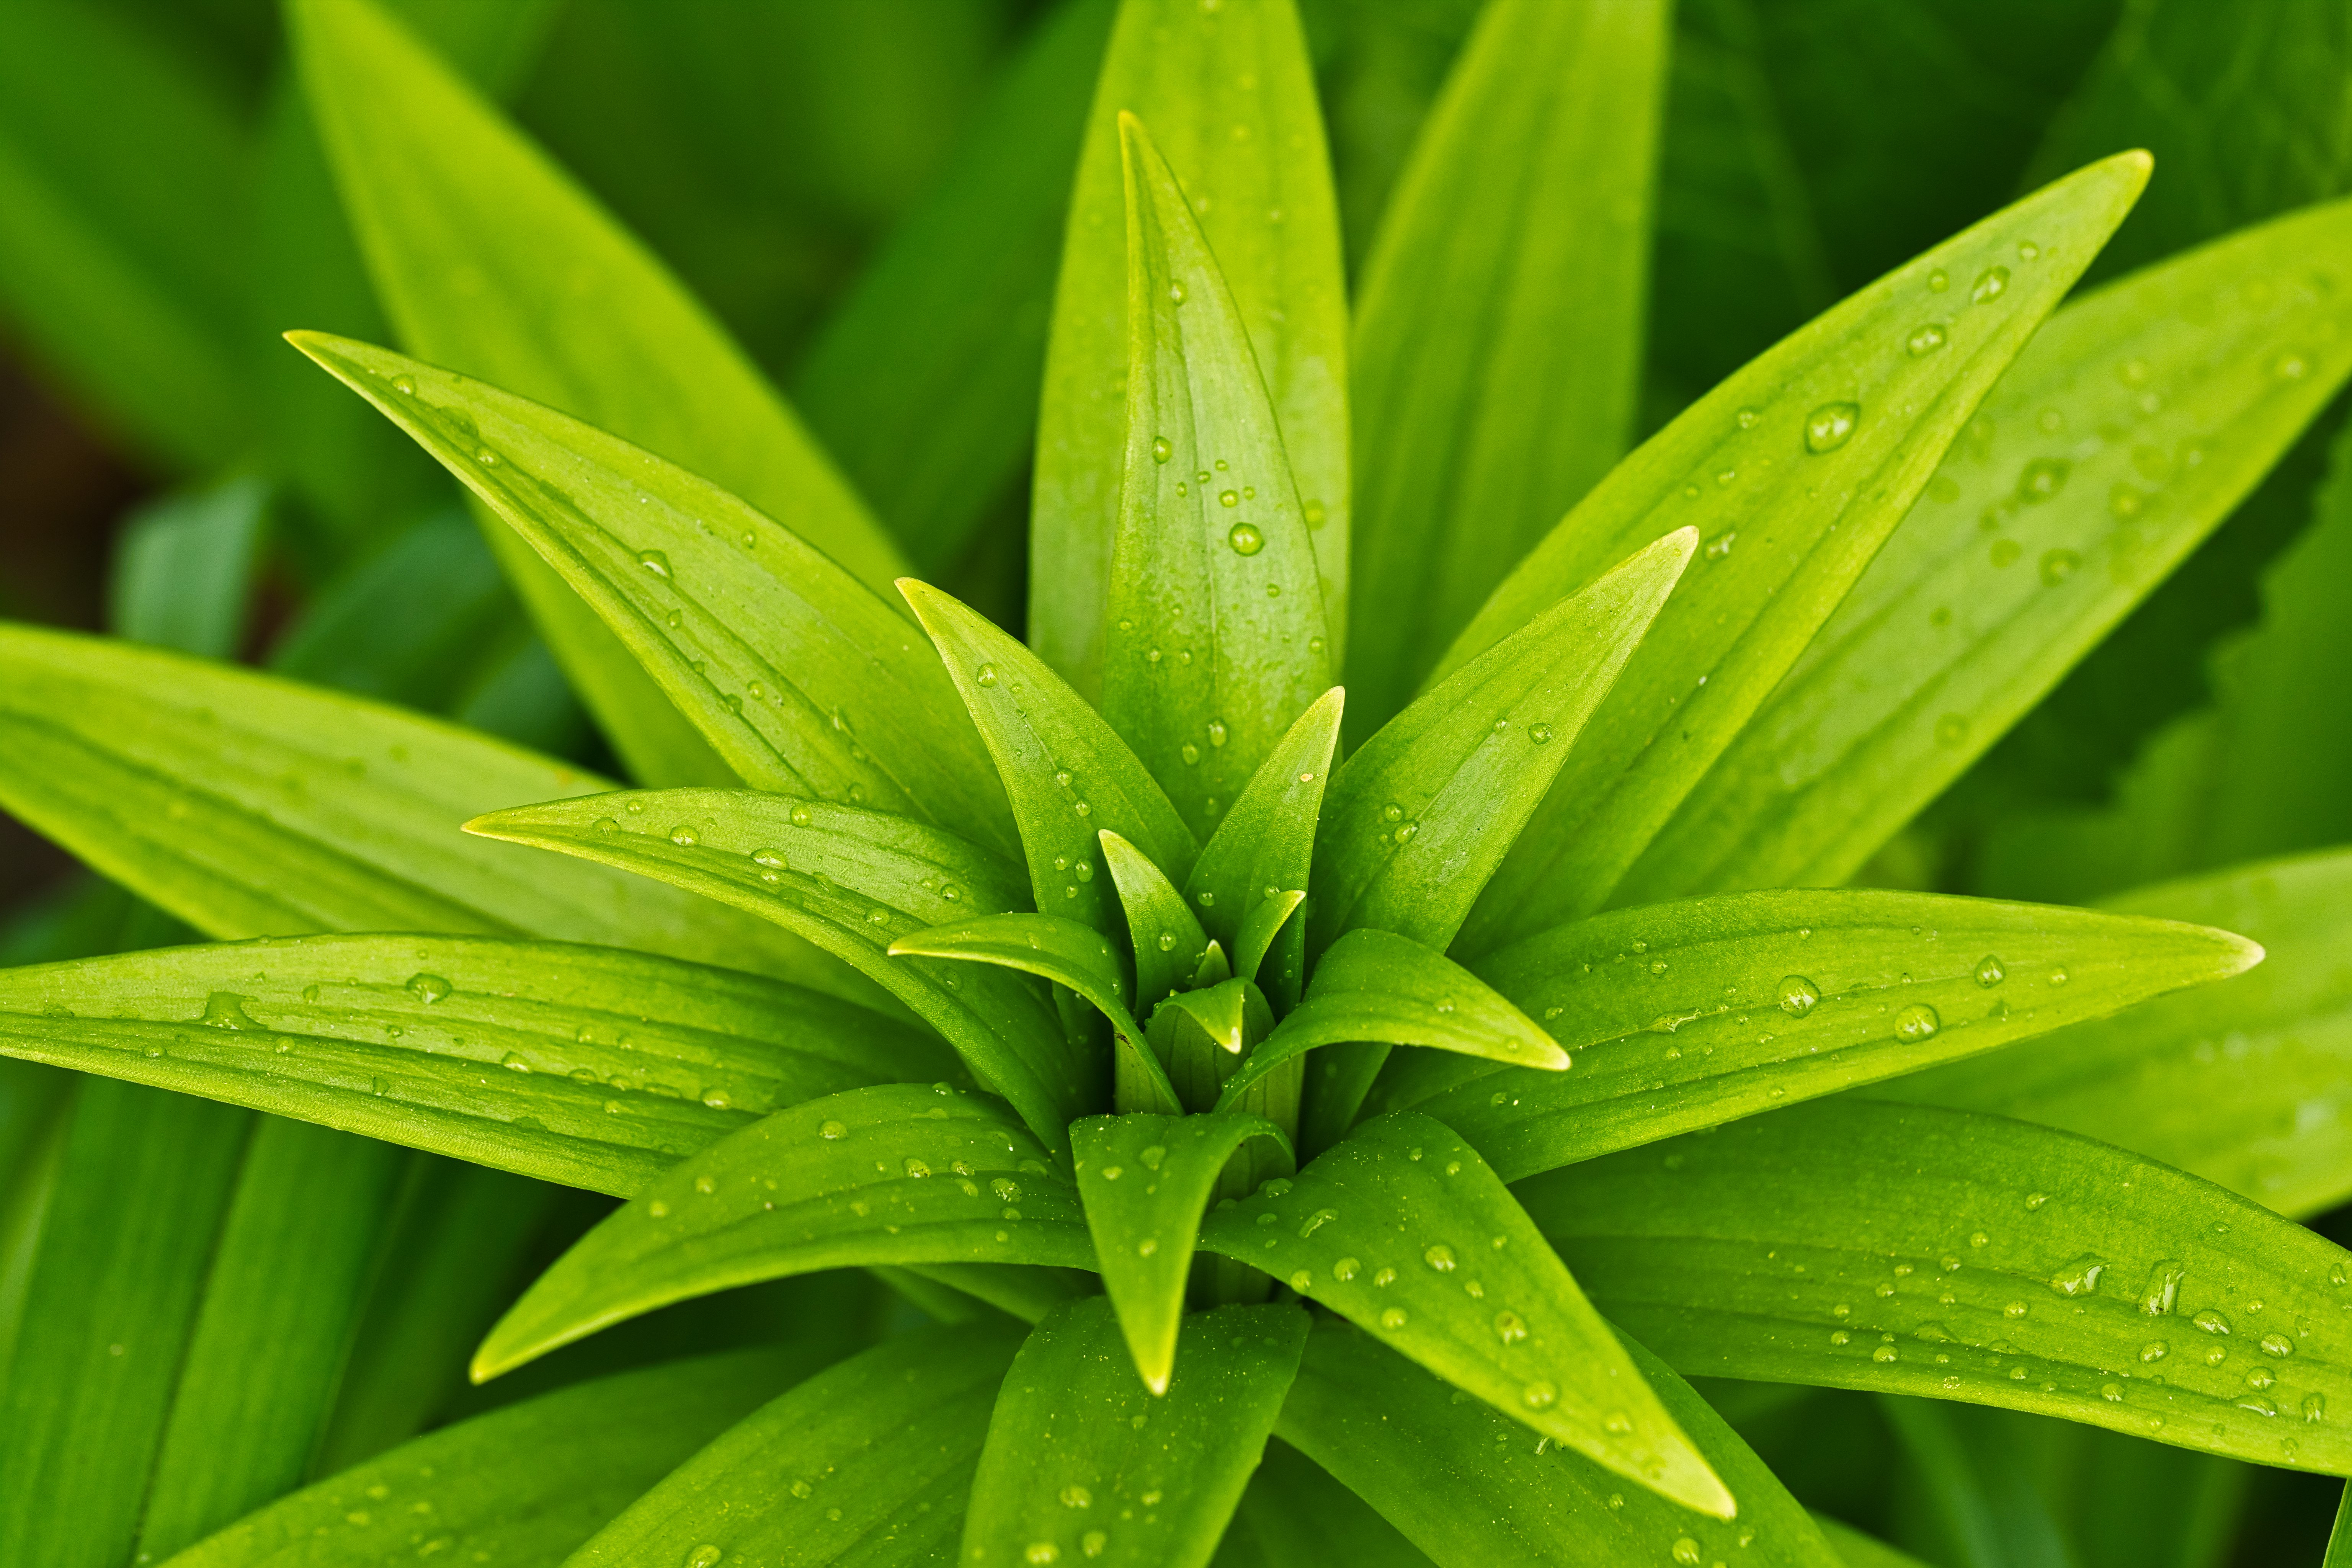 A green plant with raindrops on its leaves